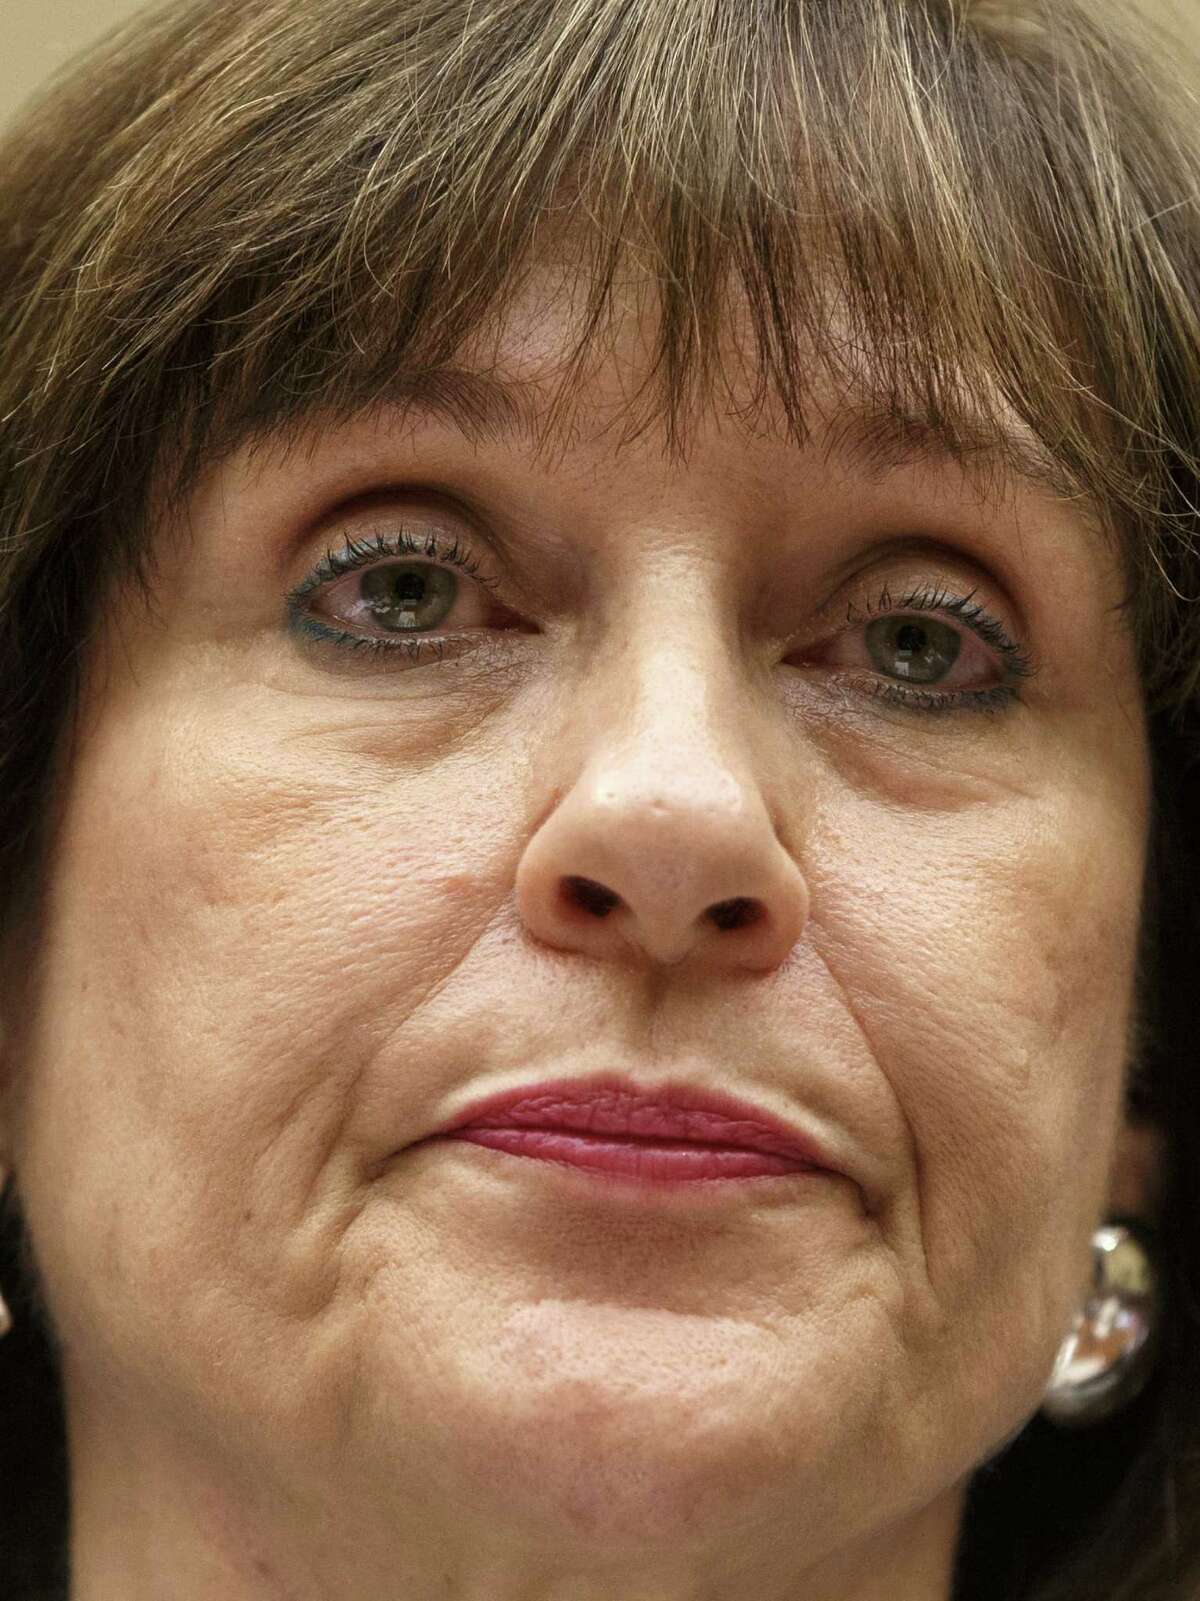 Ex-IRS official Lois Lerner called Republicans “crazies” and more in newly released emails.